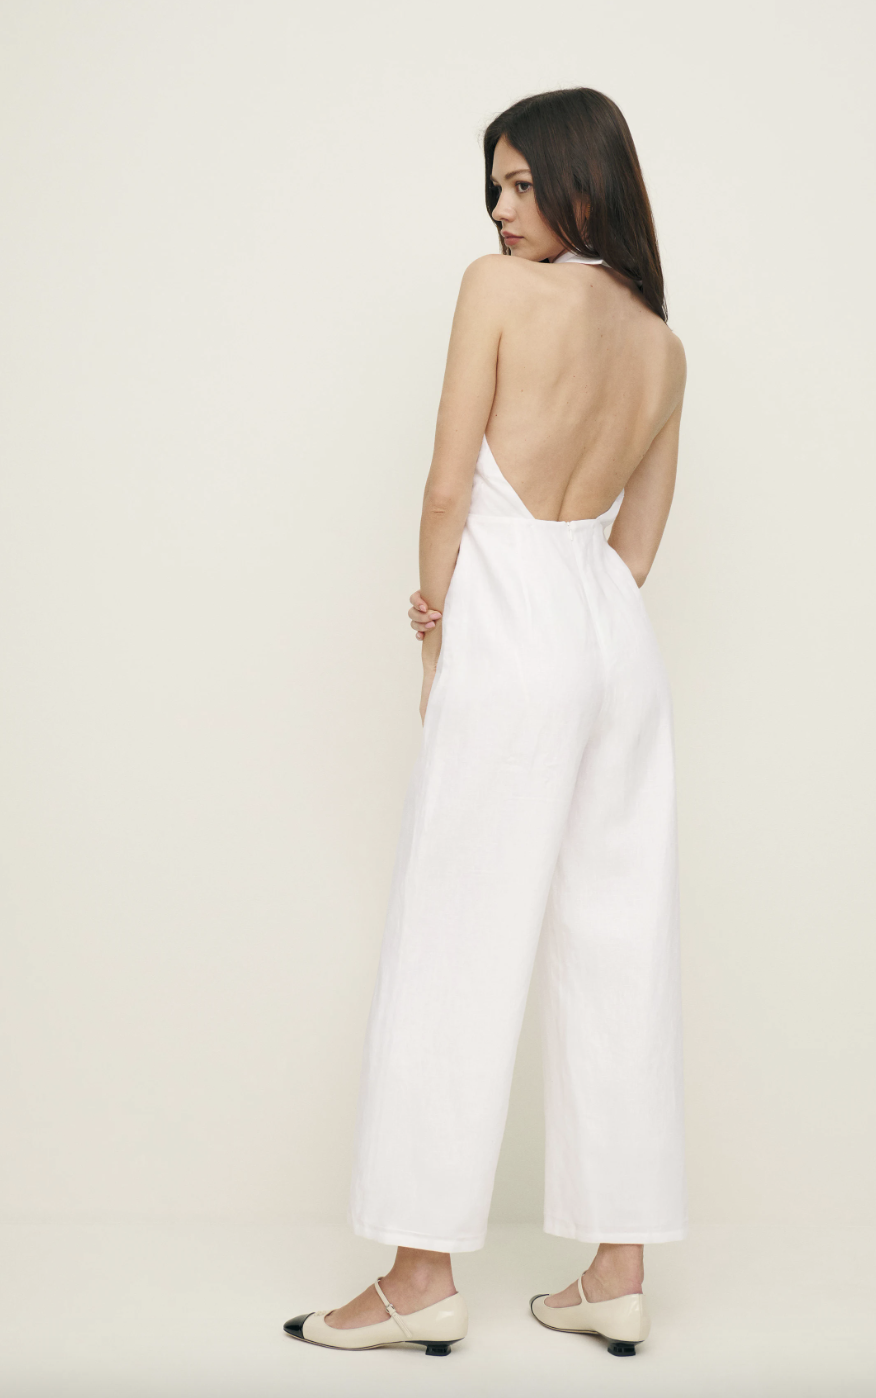 <p><strong>£248.00</strong></p><p><a href="https://www.thereformation.com/products/ryan-linen-jumpsuit/1314829WHT.html?dwvar_1314829WHT_color=WHT">Shop Now</a></p><p>For casual brides marrying abroad, this Reformation jumpsuit is a beauty and we think it's perfect for the night before the wedding. Made from 100% linen, it's got a smart, tailored collar and a stunning open back. Pair with heels, Mary Janes or ballet flats and layers of gold jewellery. </p>